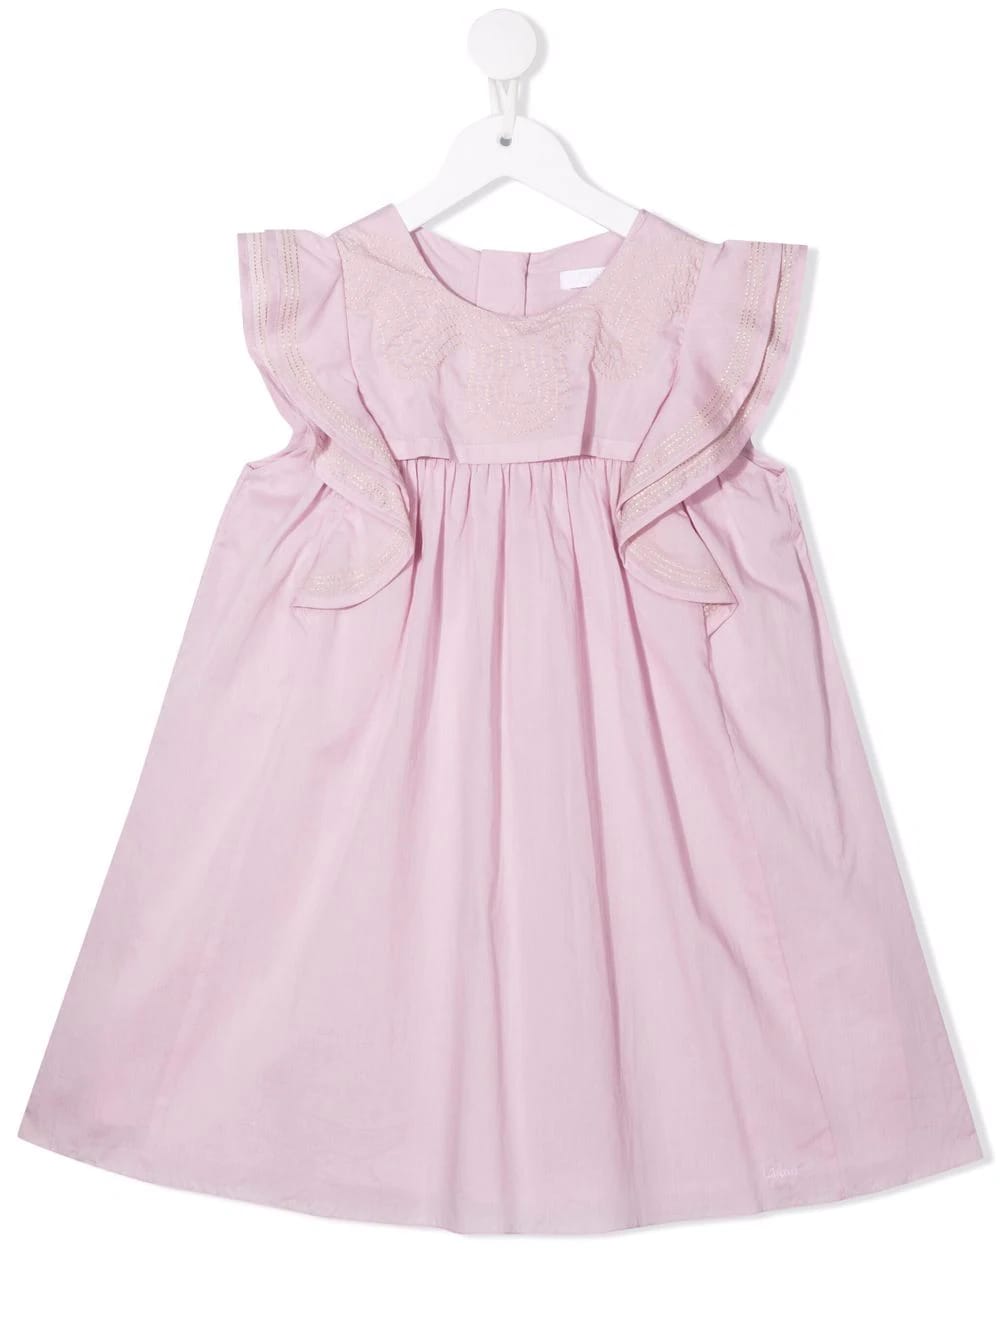 Chloé Kids Dress In Mauve Pink Cotton Voile With Golden Stitching